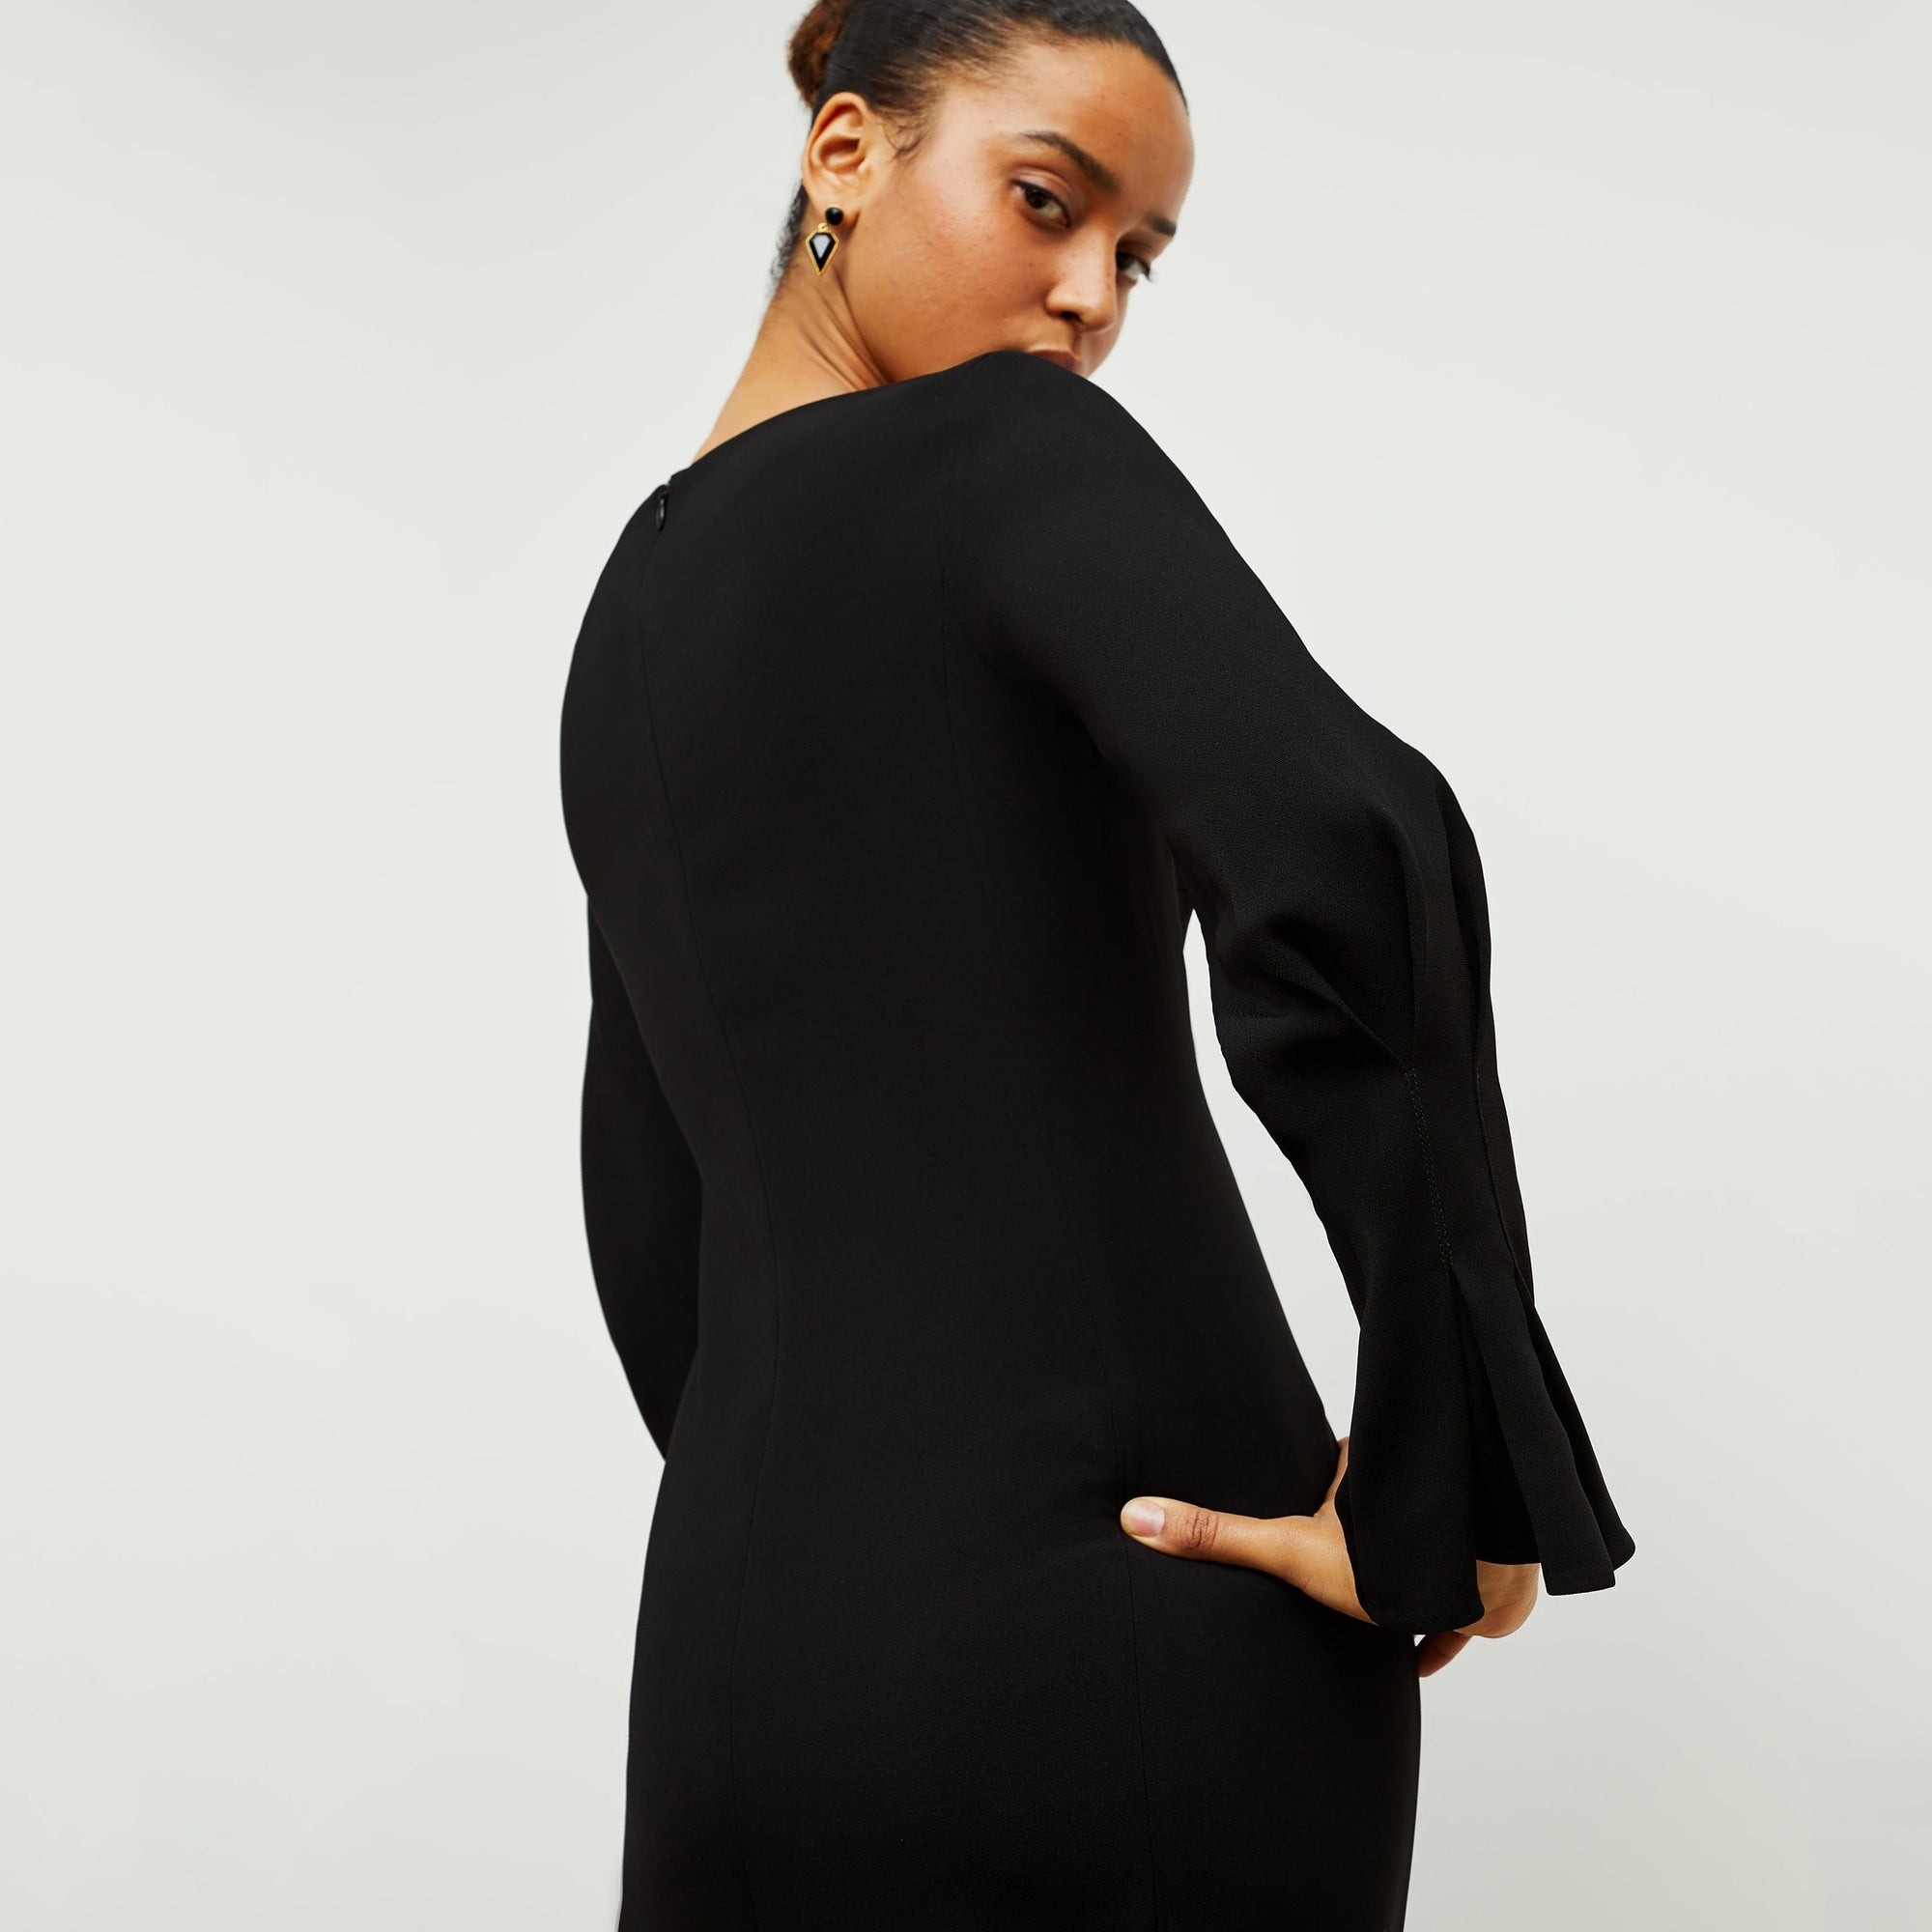 Back image of a woman standing wearing the Regina Dress in Black